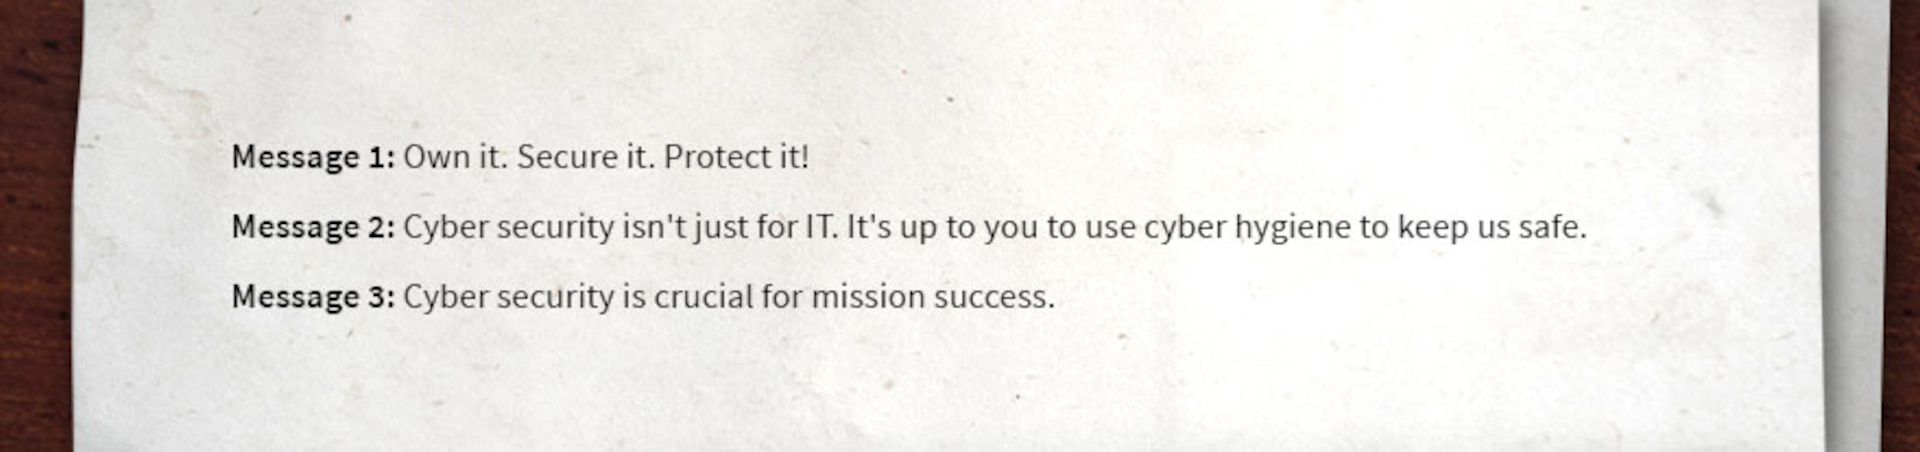 Example messages. Message 1 Own it. Secure it. Protect it. Message 2, Cyber security isn't just for IT. It's up to you to use cyber hygiene to keep us safe. Message 3 Cyber security is crucial for mission success.